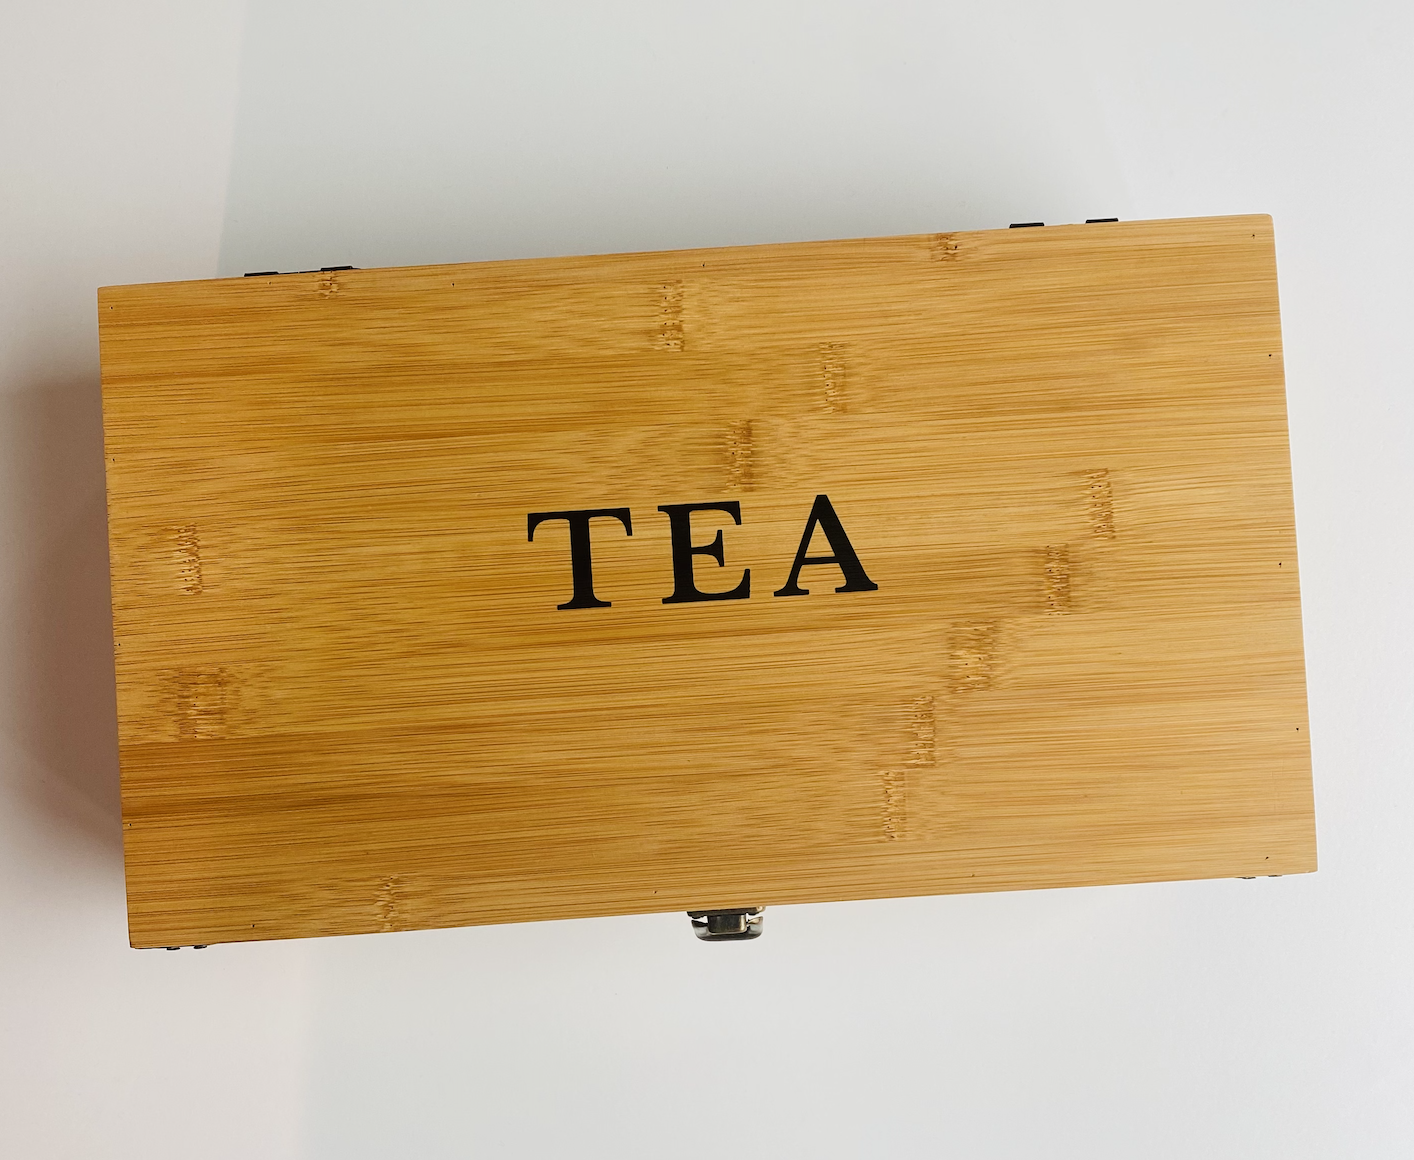 Classic Bamboo Tea Chest – Two Leaves and a Bud